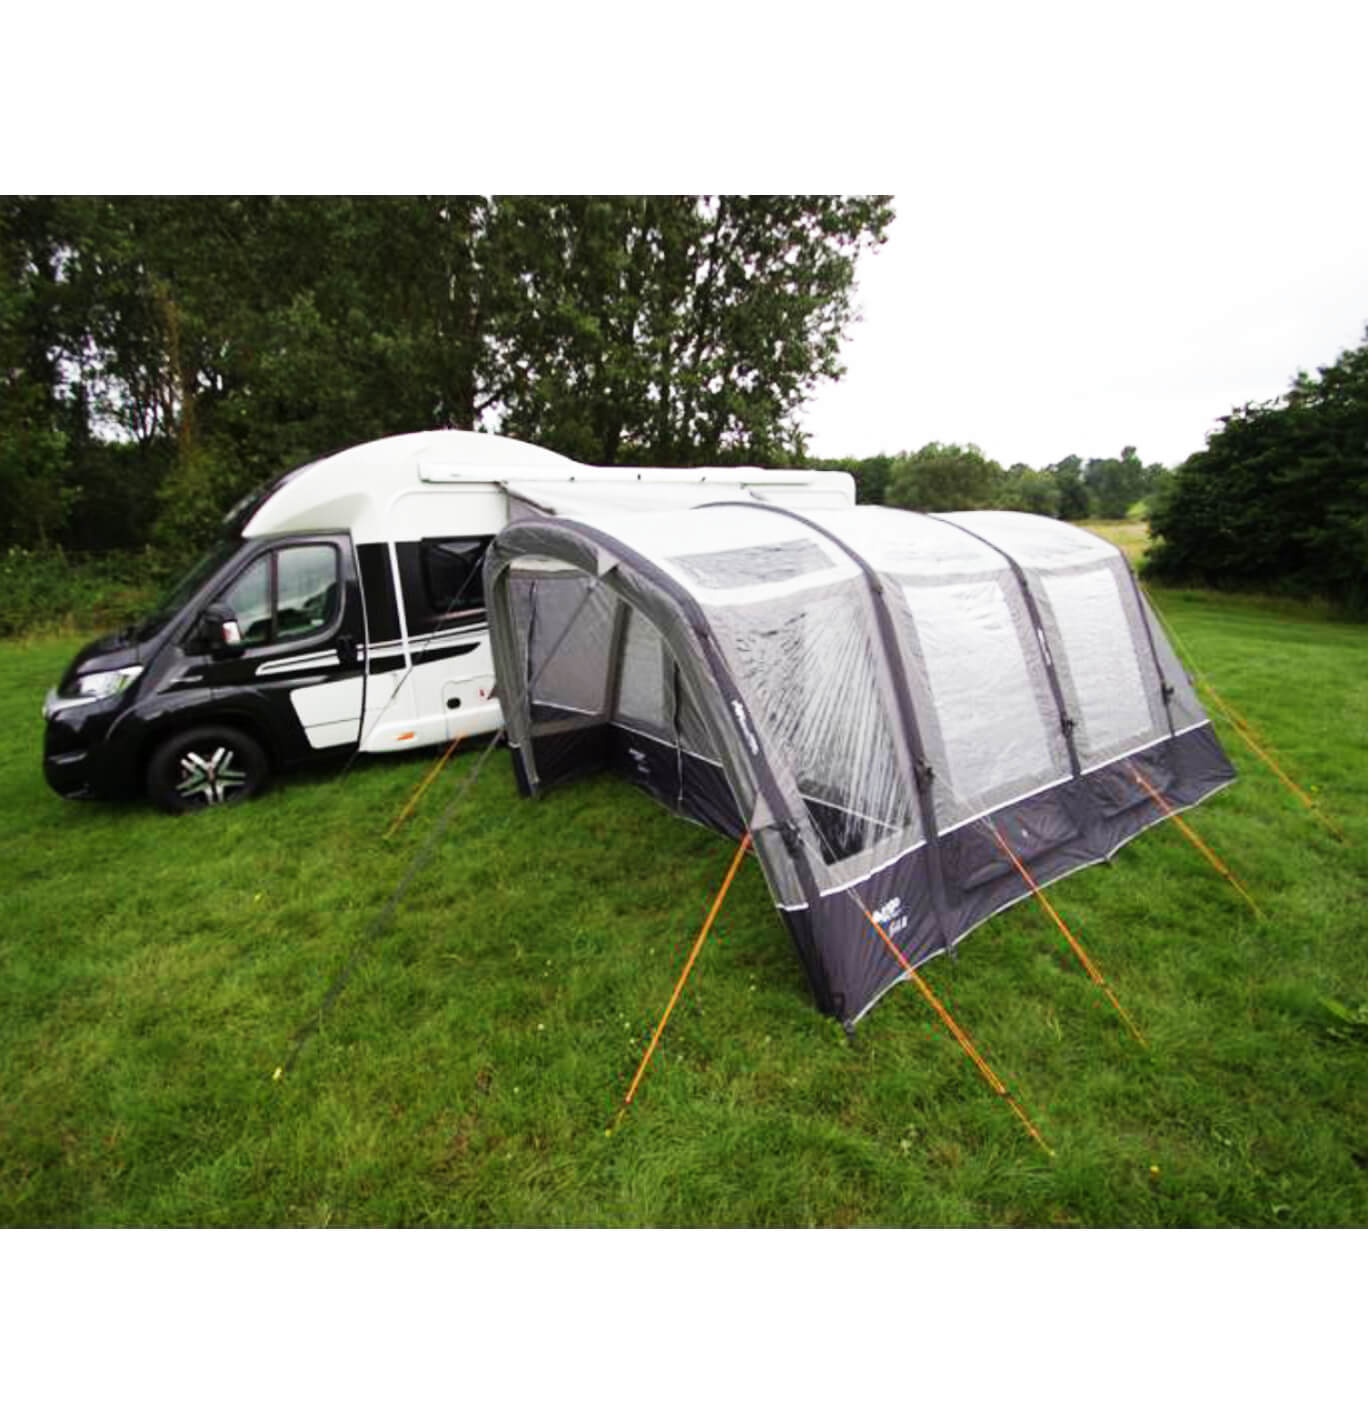 External picture of the Galli pitched to a large motorhome